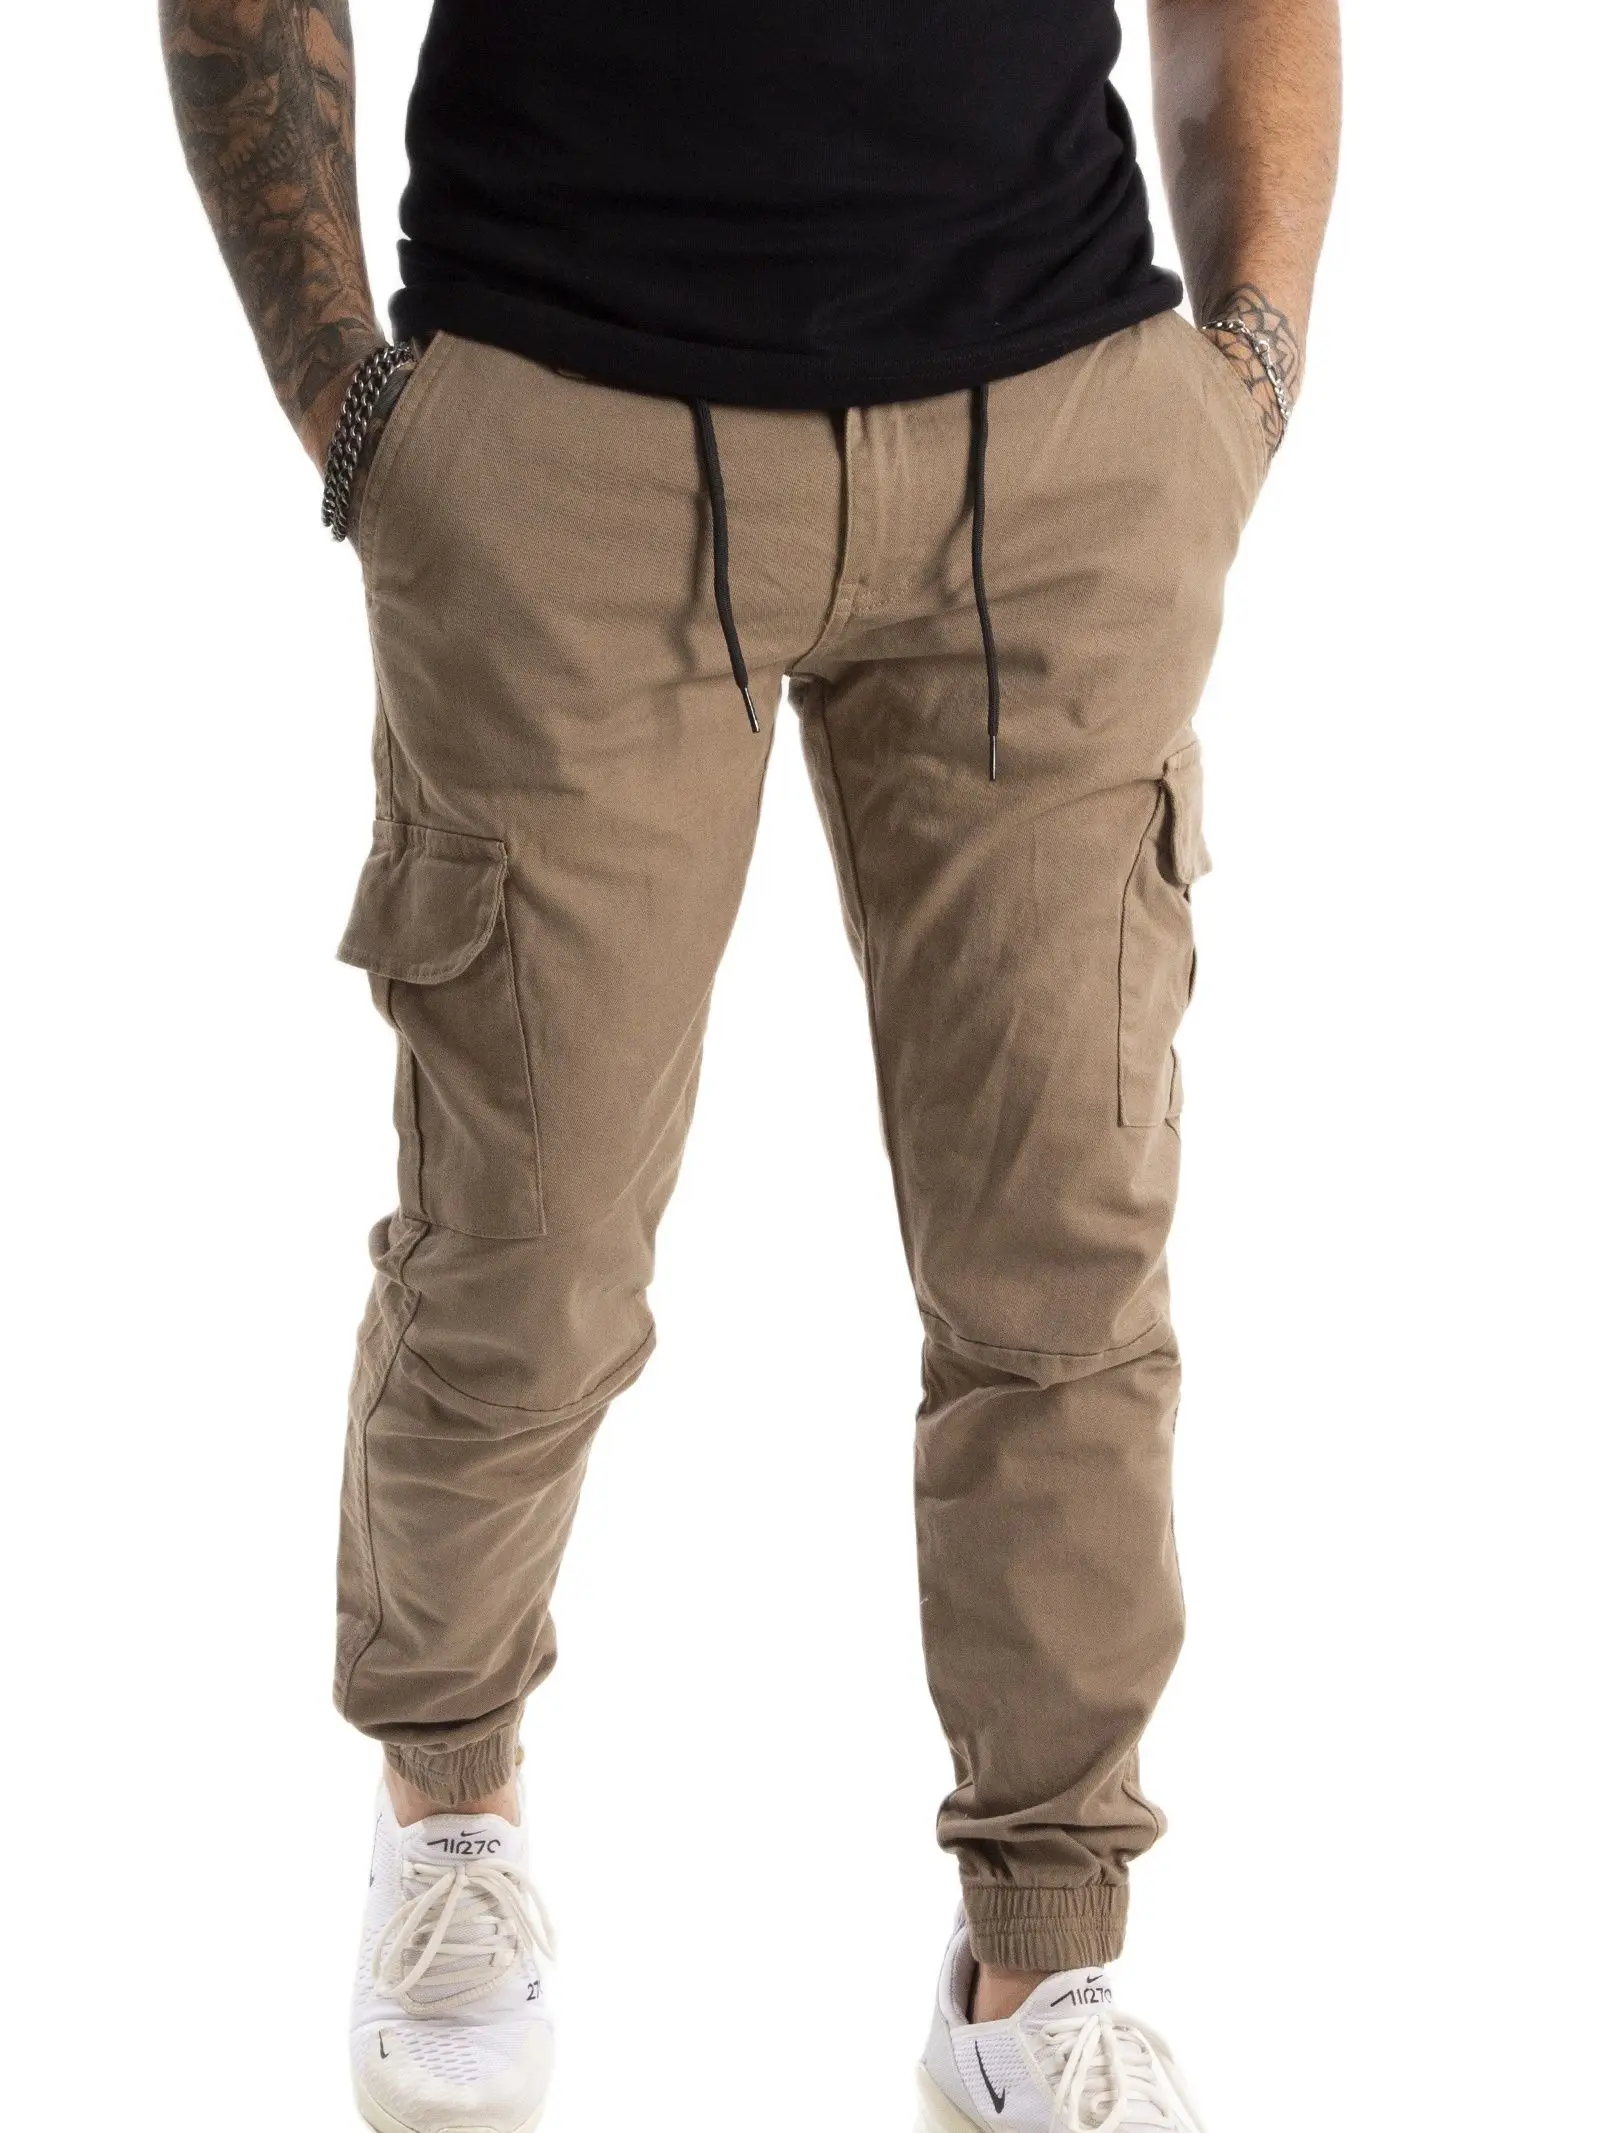 

DeepSEA Male Beige Slim Fit Cargo Pants Bell-Bottomed and Elasticized Waist Military Tactical SWAT Rap Joggers Casual Street Wear 1601569